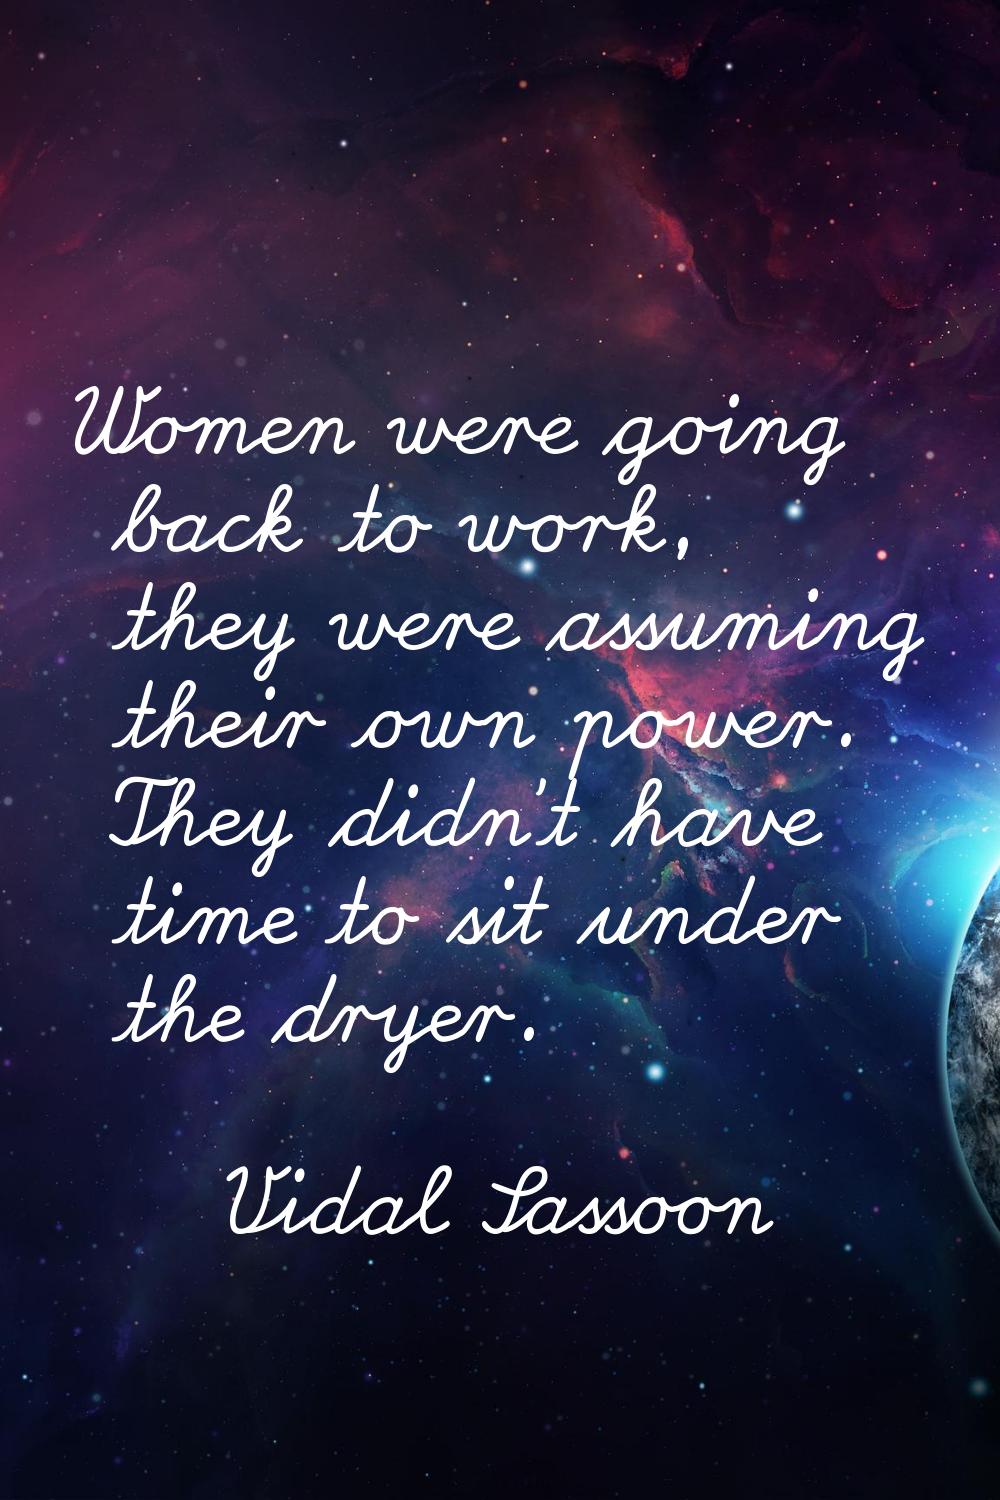 Women were going back to work, they were assuming their own power. They didn't have time to sit und